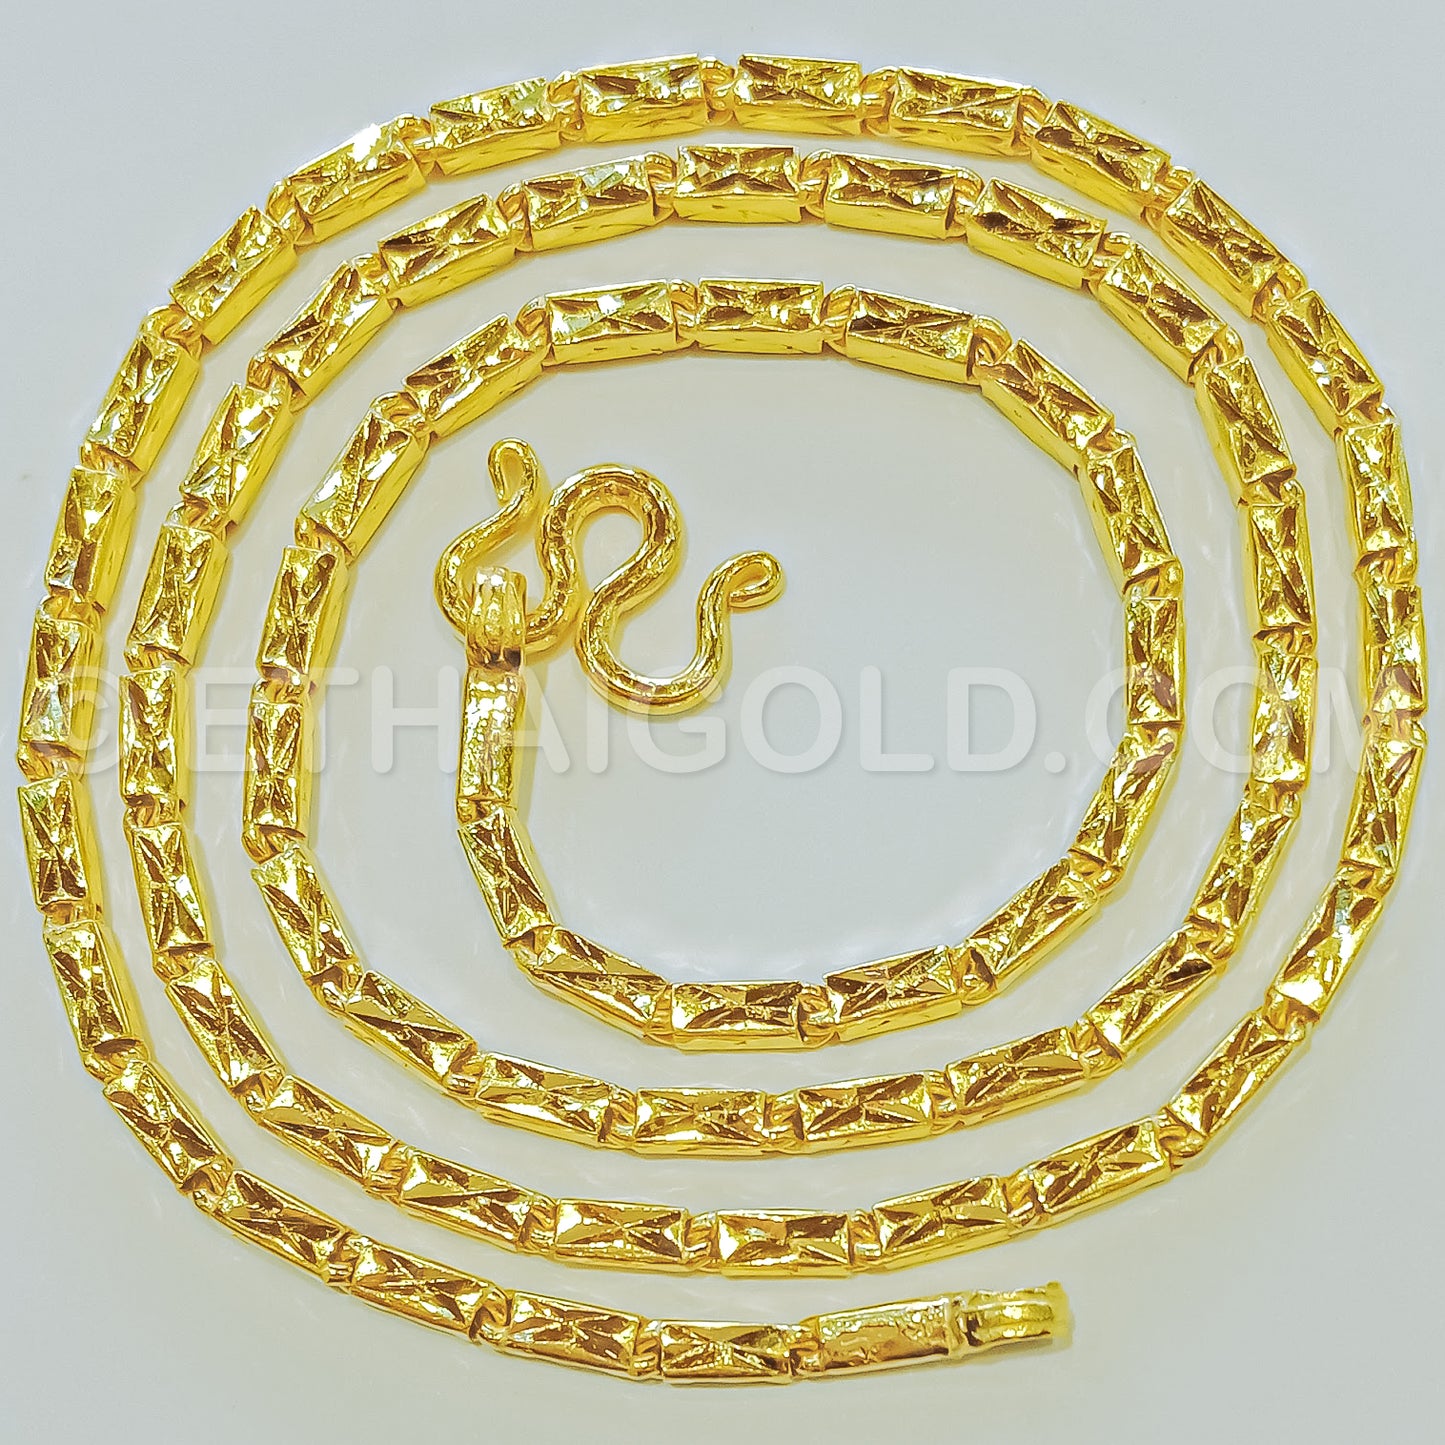 1 BAHT POLISHED SINGLE-X-DIAMOND-CUT SOLID SQUARE BARREL CHAIN NECKLACE IN 23K GOLD (ID: N2101B)